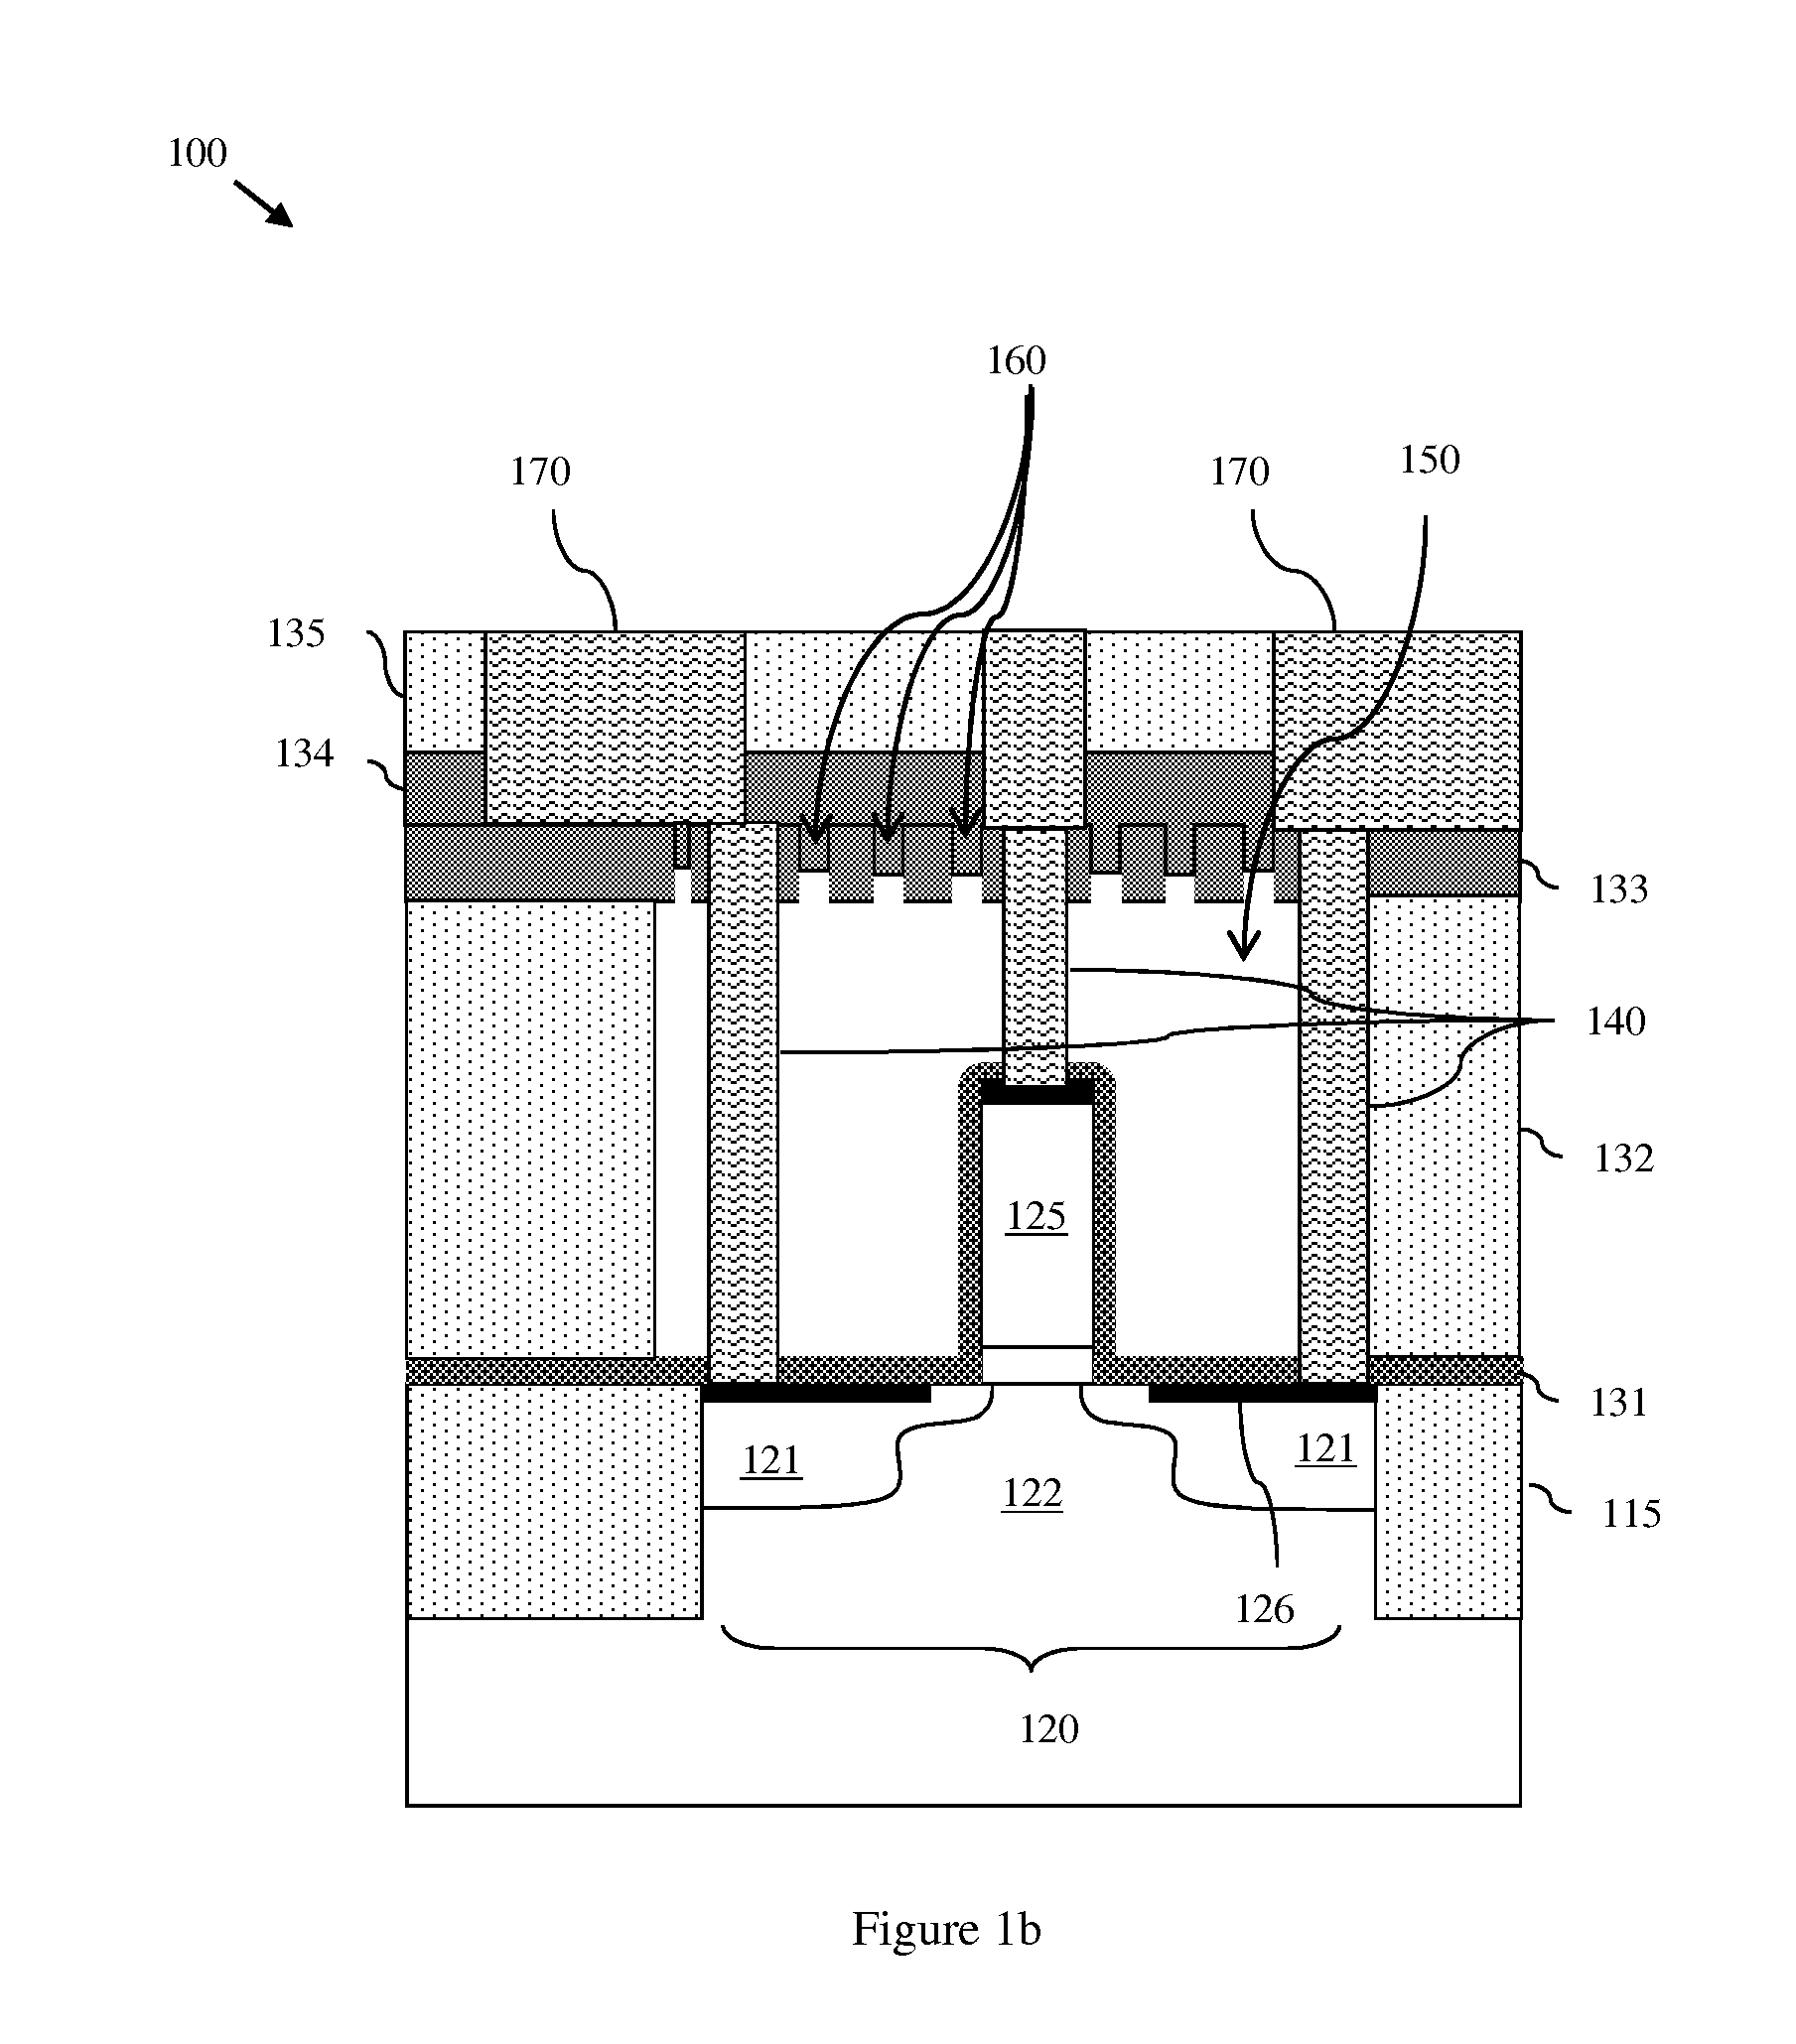 Semiconductor structure having a contact-level air gap within the interlayer dielectrics above a semiconductor device and a method of forming the semiconductor structure using a self-assembly approach